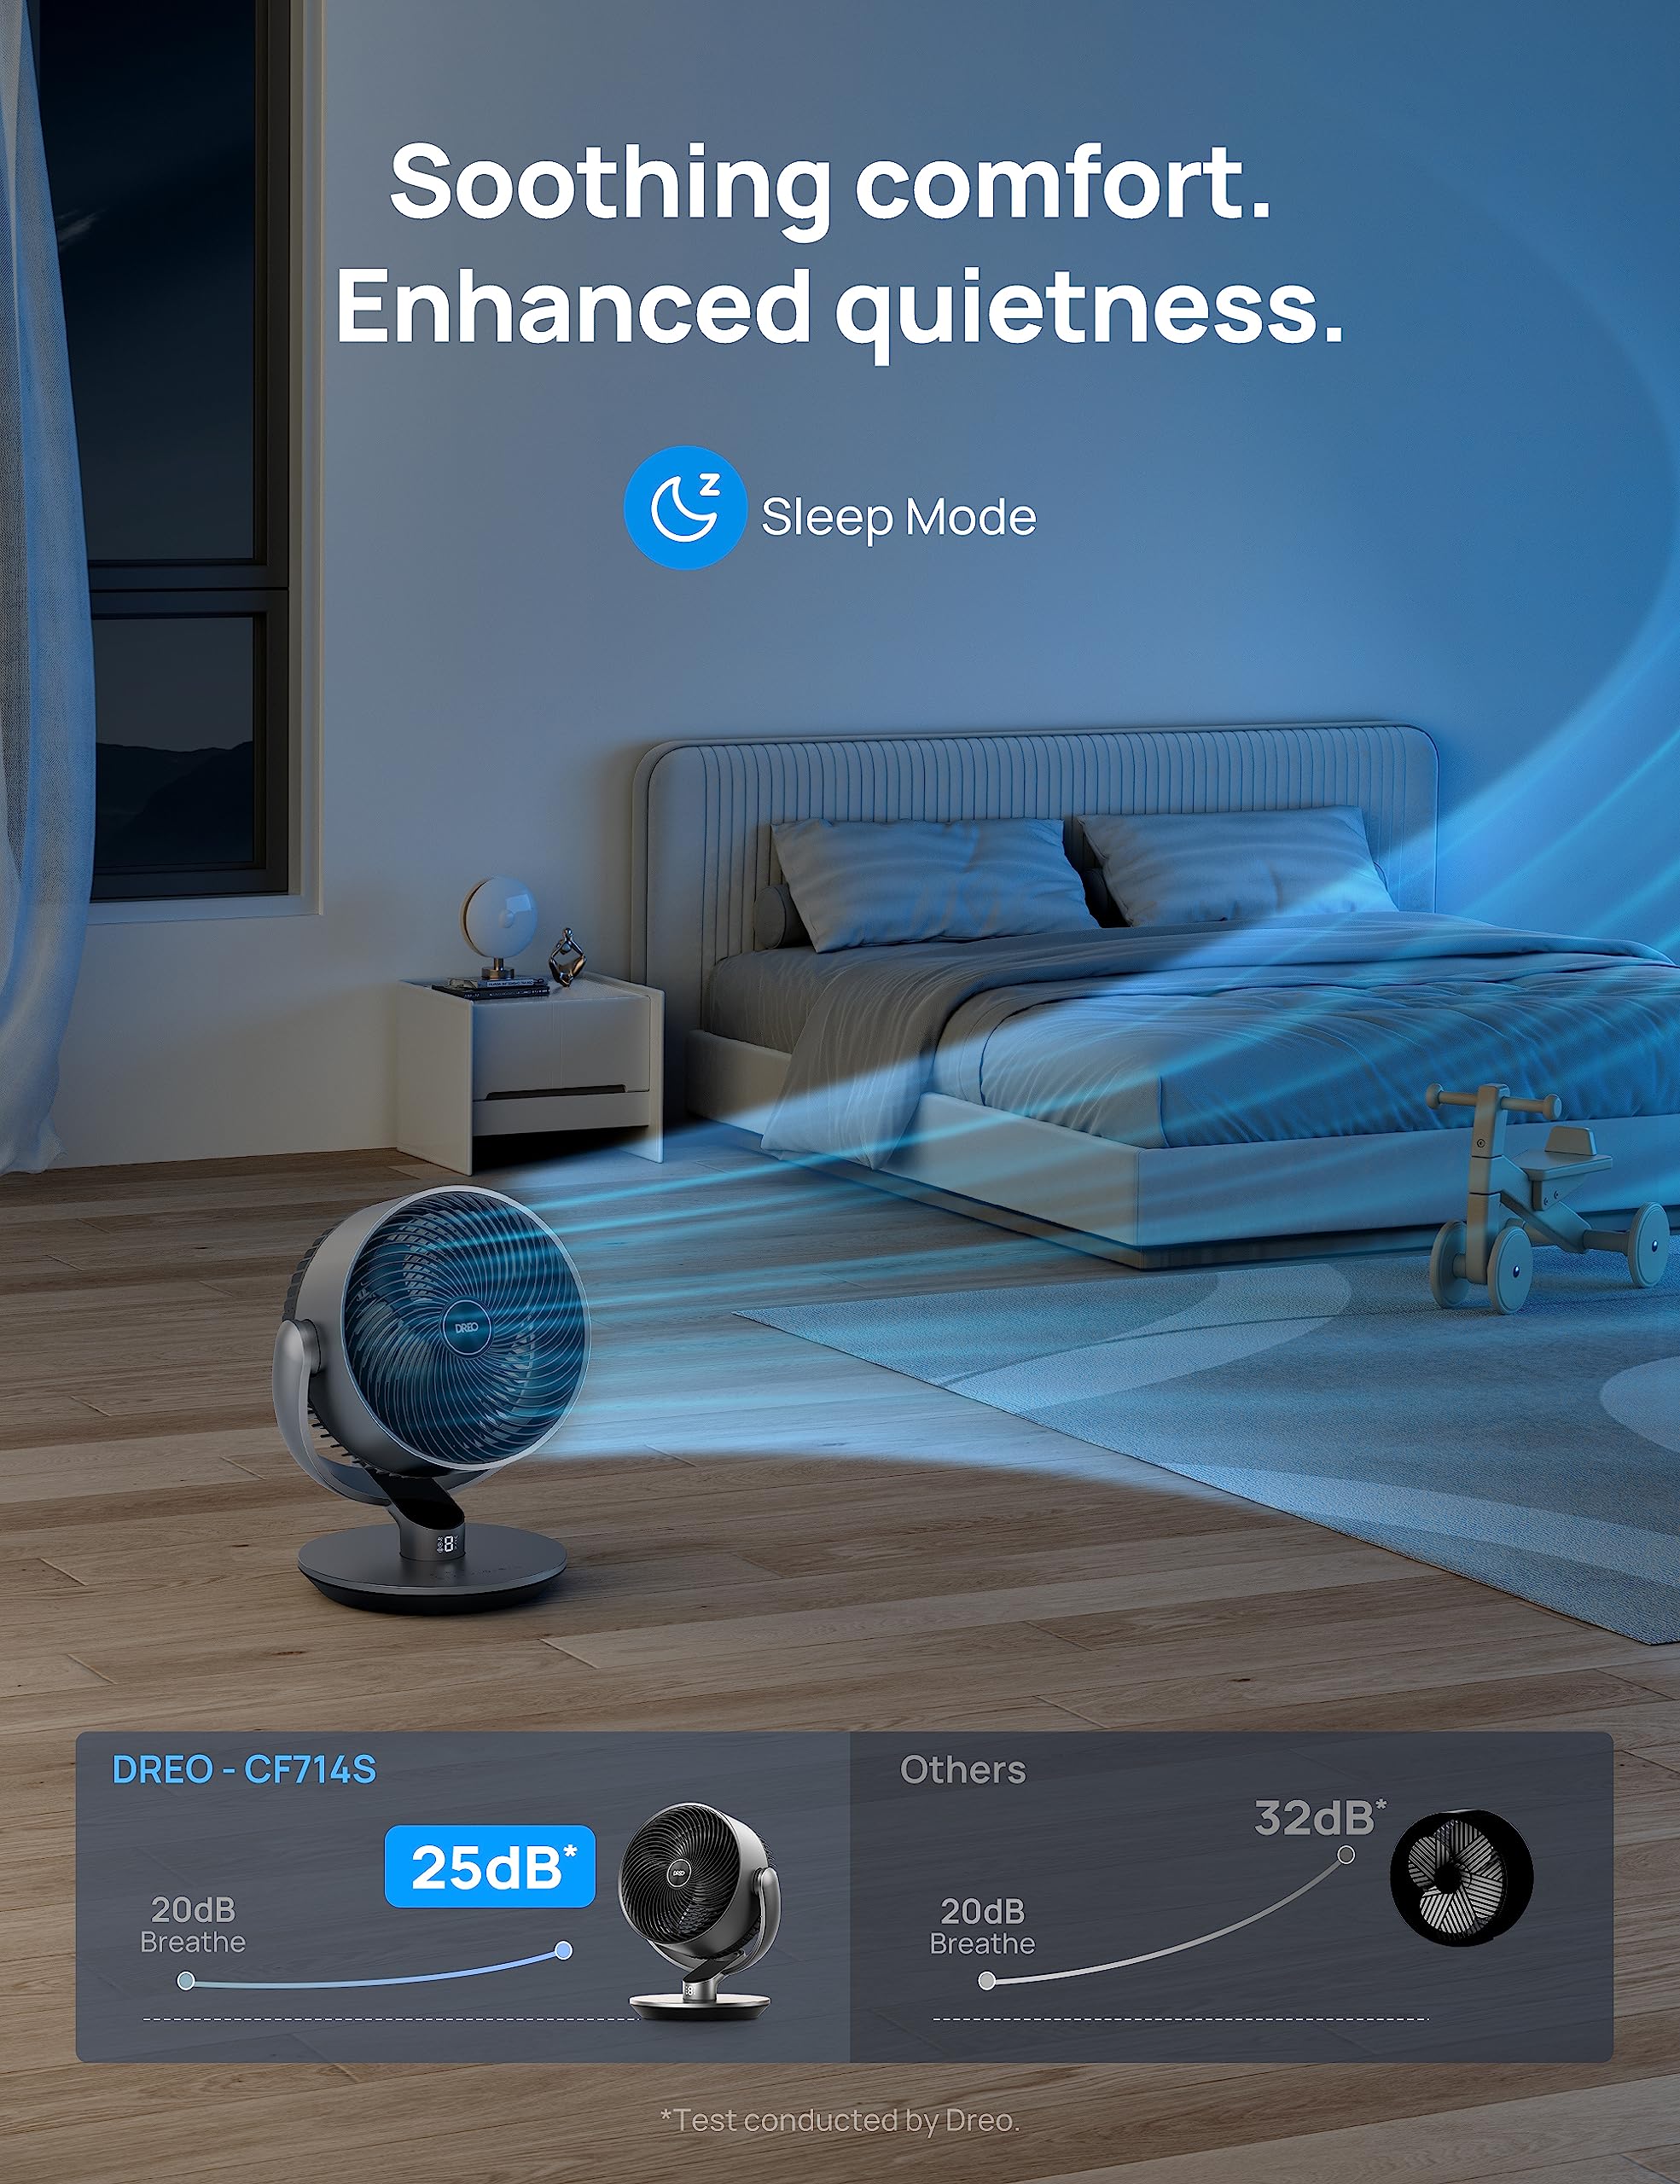 Dreo Smart Fans for Bedroom, 11 Inch, 25dB Quiet DC Room Fan with Remote, 120°+90° Oscillating Fan, 6 Modes, 9 Speeds, 12H Timer,Works Alexa/Google/WiFi/Voice Control, Black and Silver, Oversize